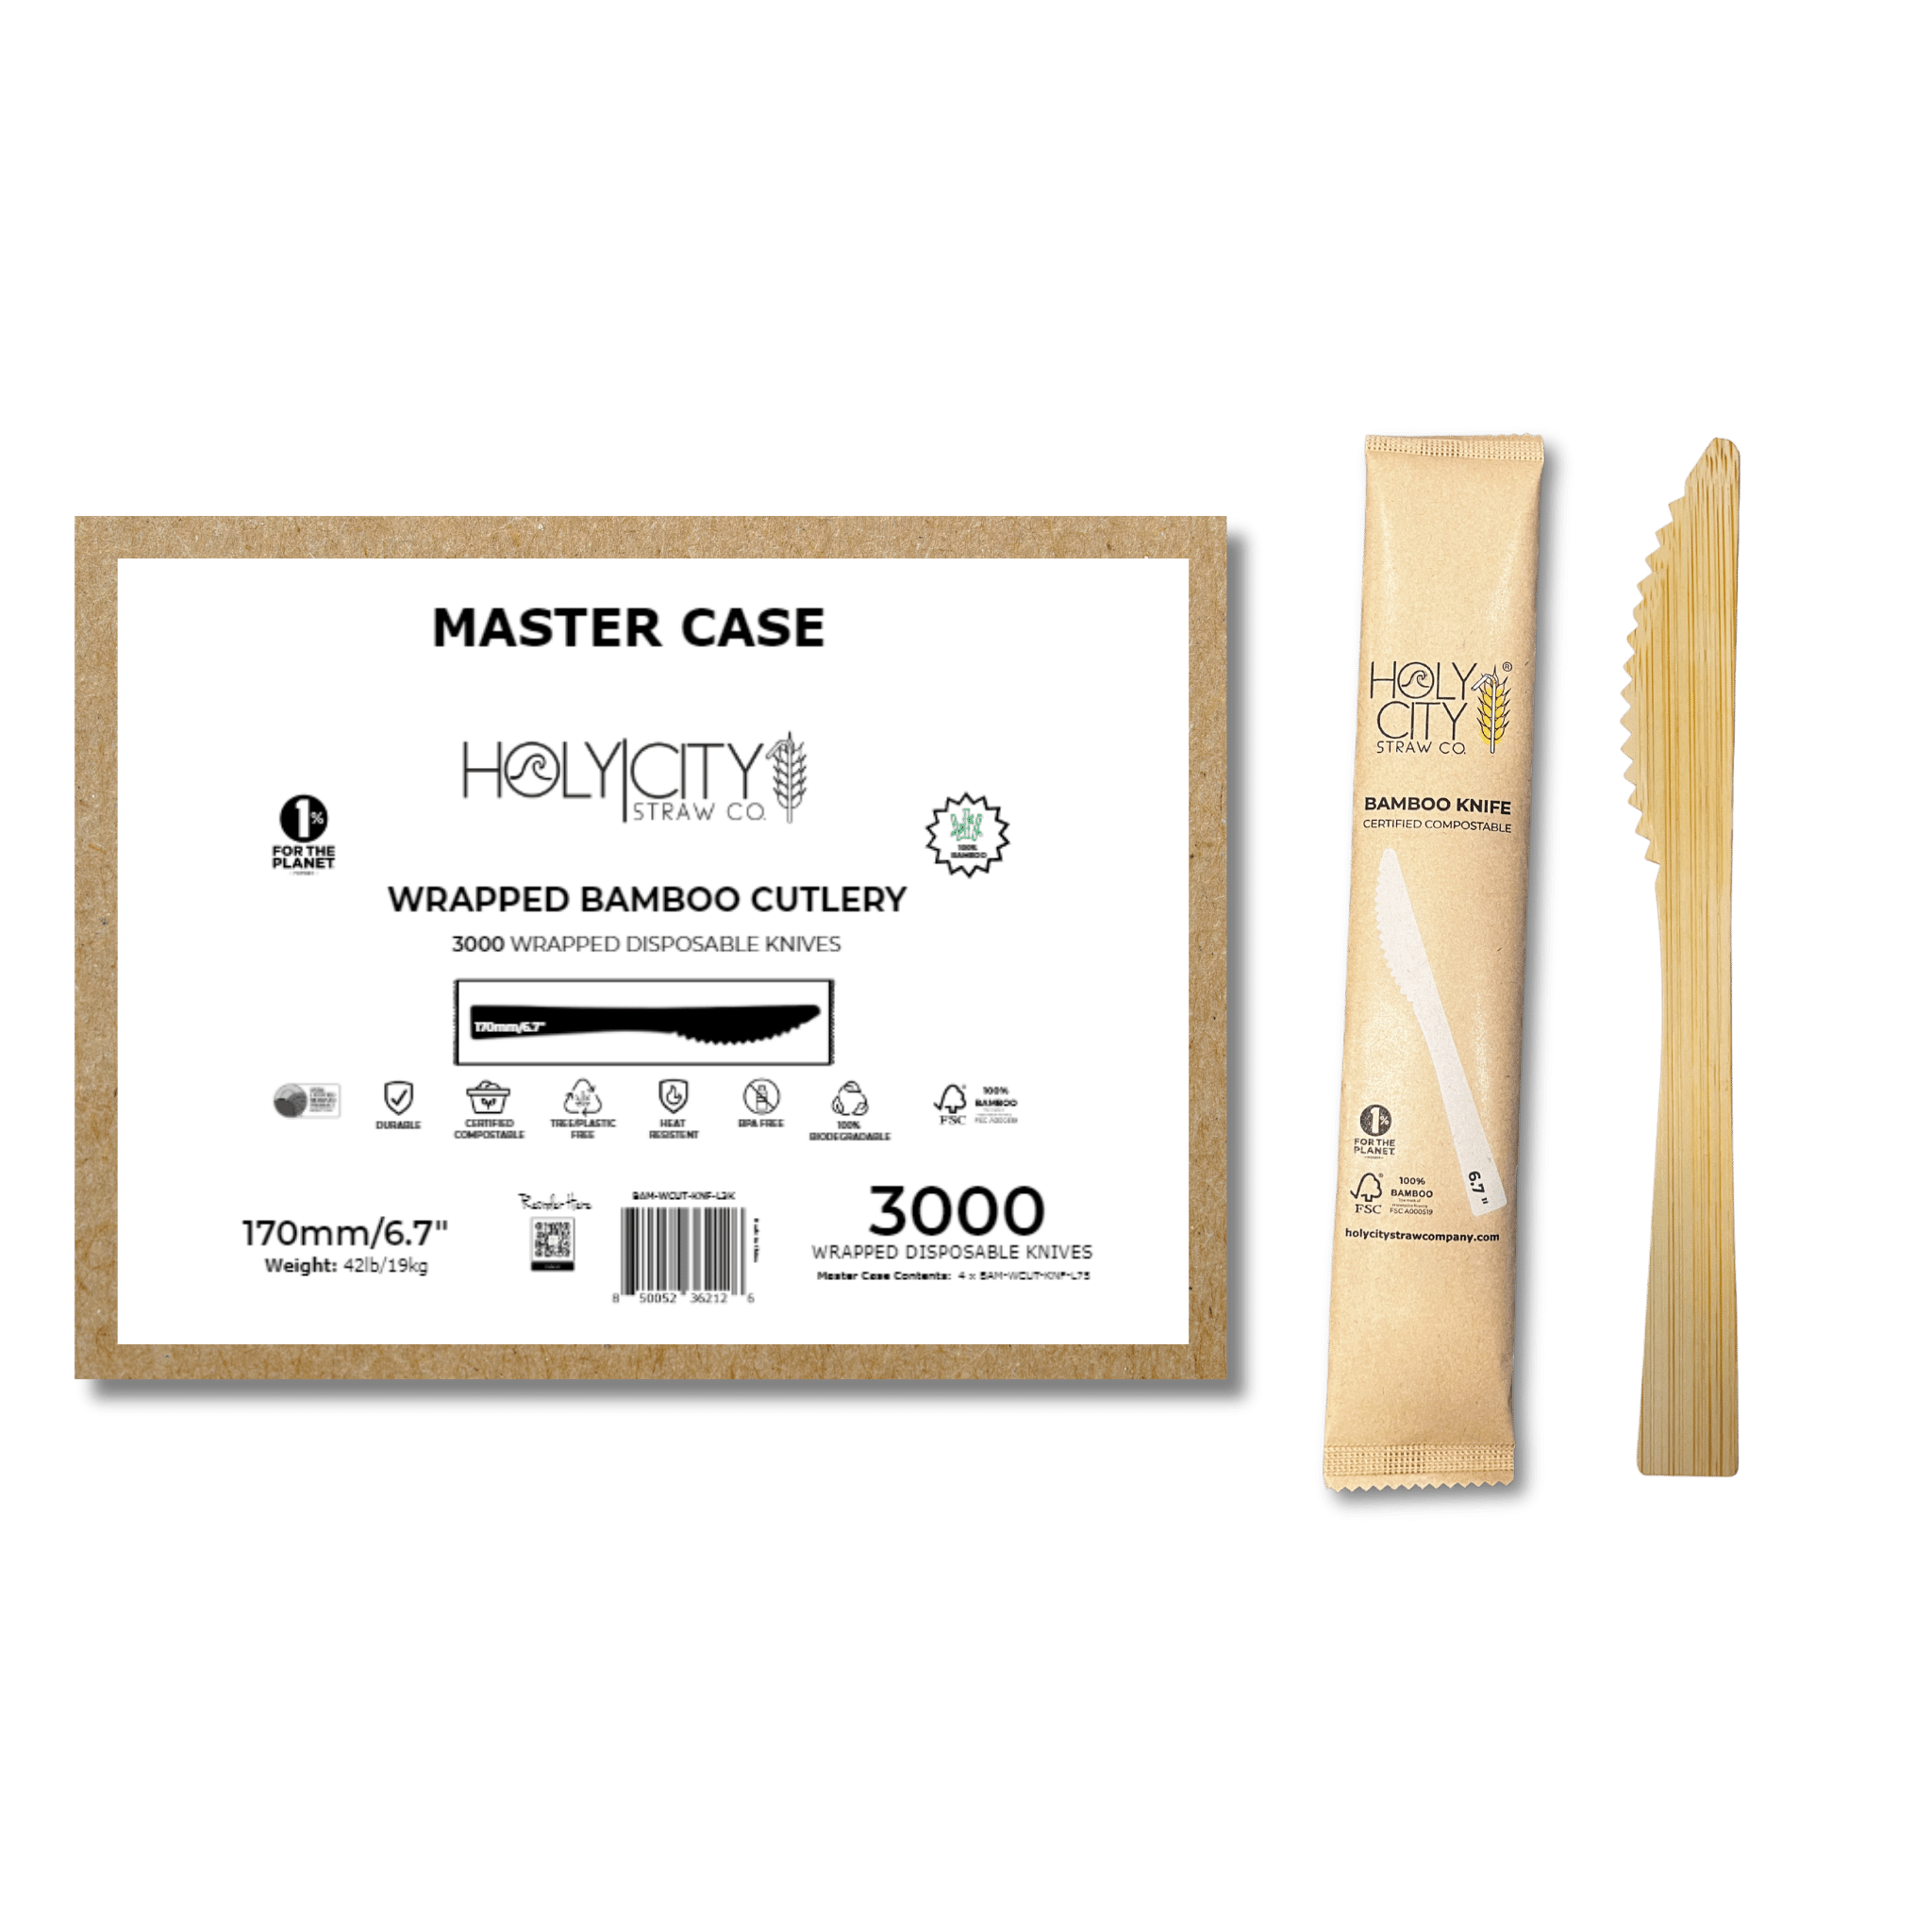 Master Case of Holy City Straw Company Wrapped Bamboo Knives 3000 disposable knives each individually wrapped